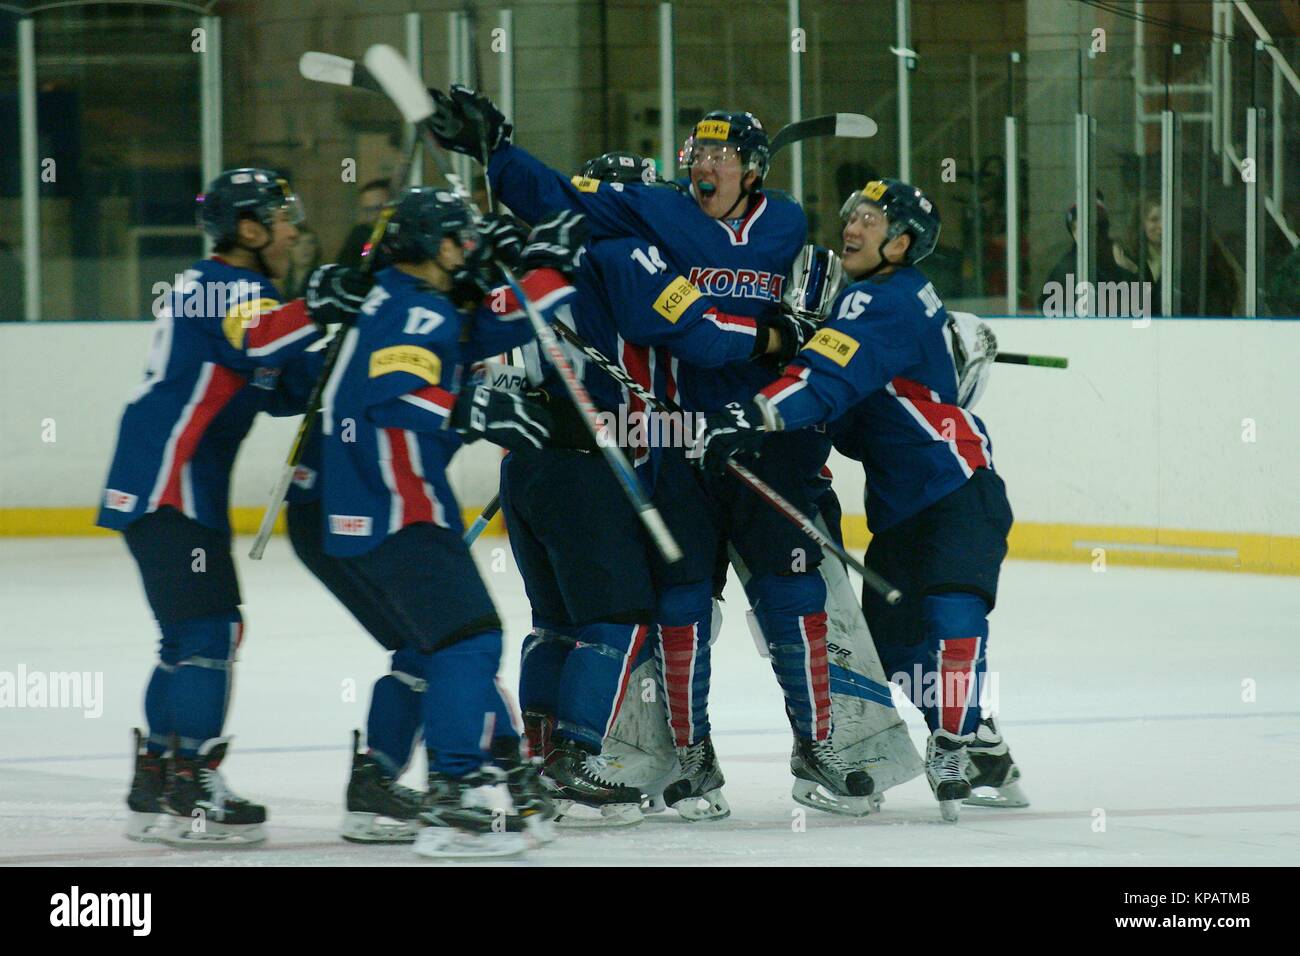 Dumfries, Scotland, 14 December 2017. Korea celebrating their penalty shoot out win over Great Britainin the 2018 IIHF Ice Hockey U20 World Championship Division II, Group A match in Dumfries. Credit: Colin Edwards/Alamy Live News. Stock Photo